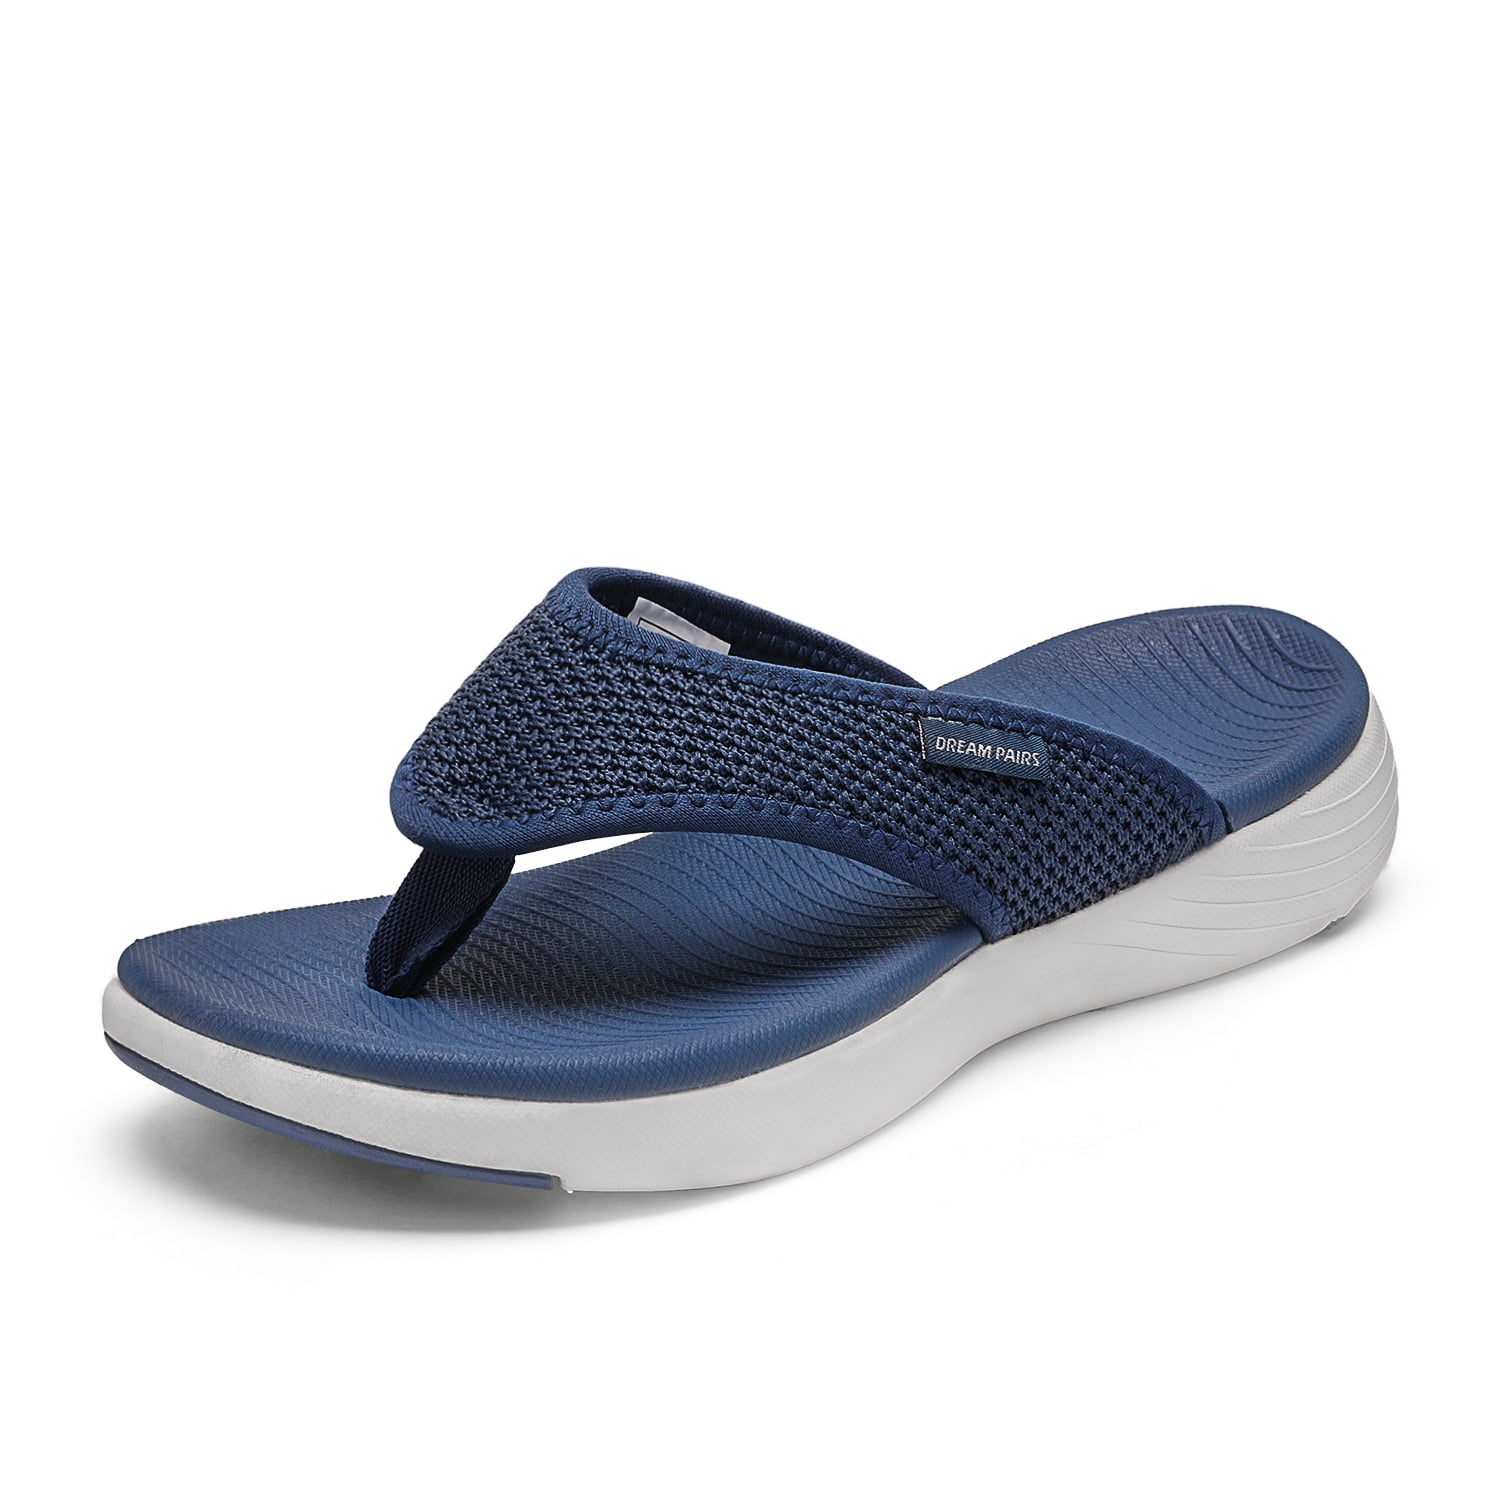 thong slippers with arch support